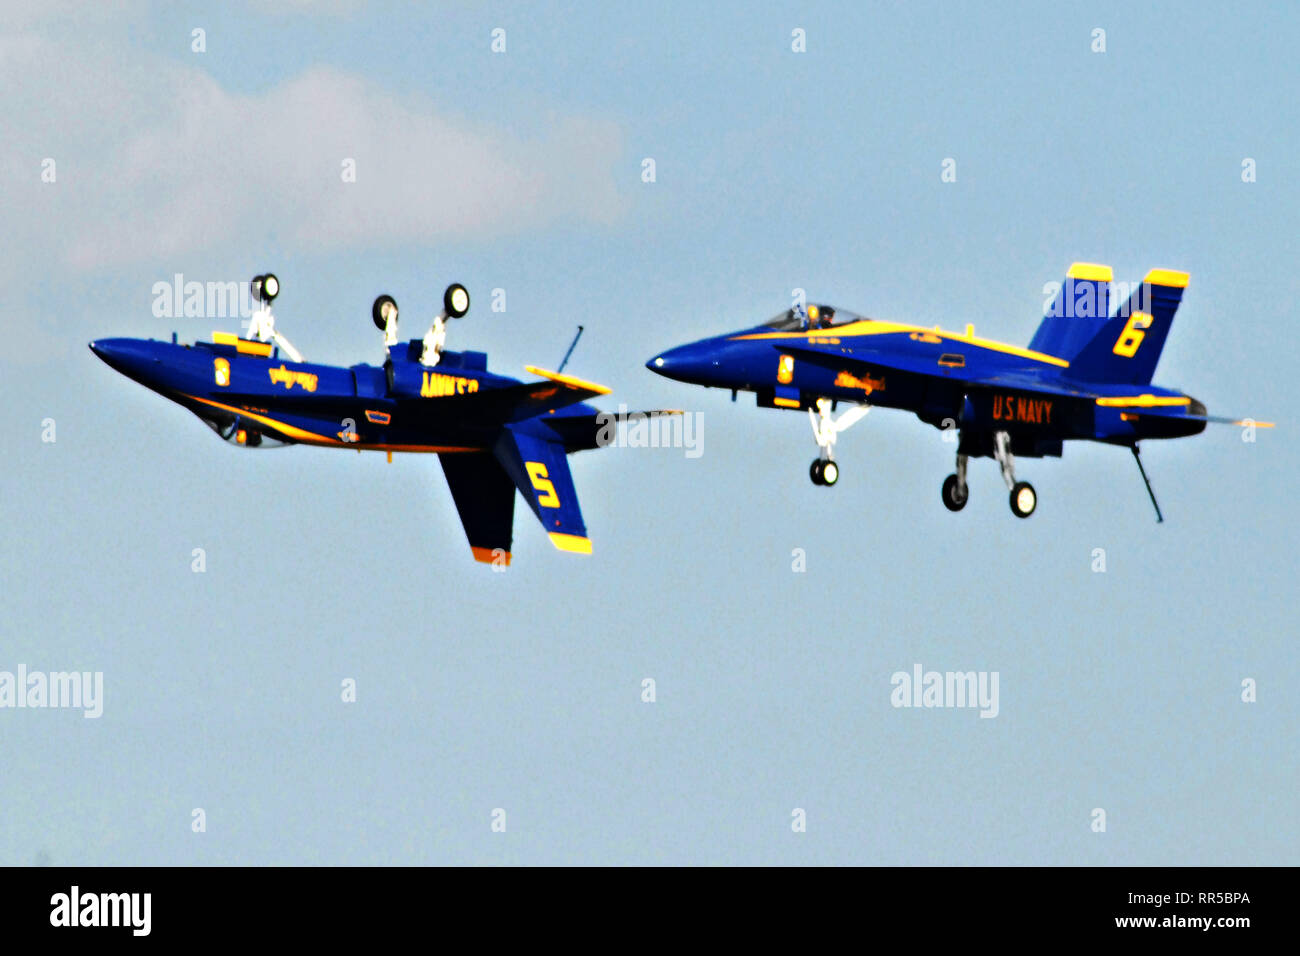 2 US NAVY BLUE ANGLES Aircraft One Standard and one Inverted Stock Photo